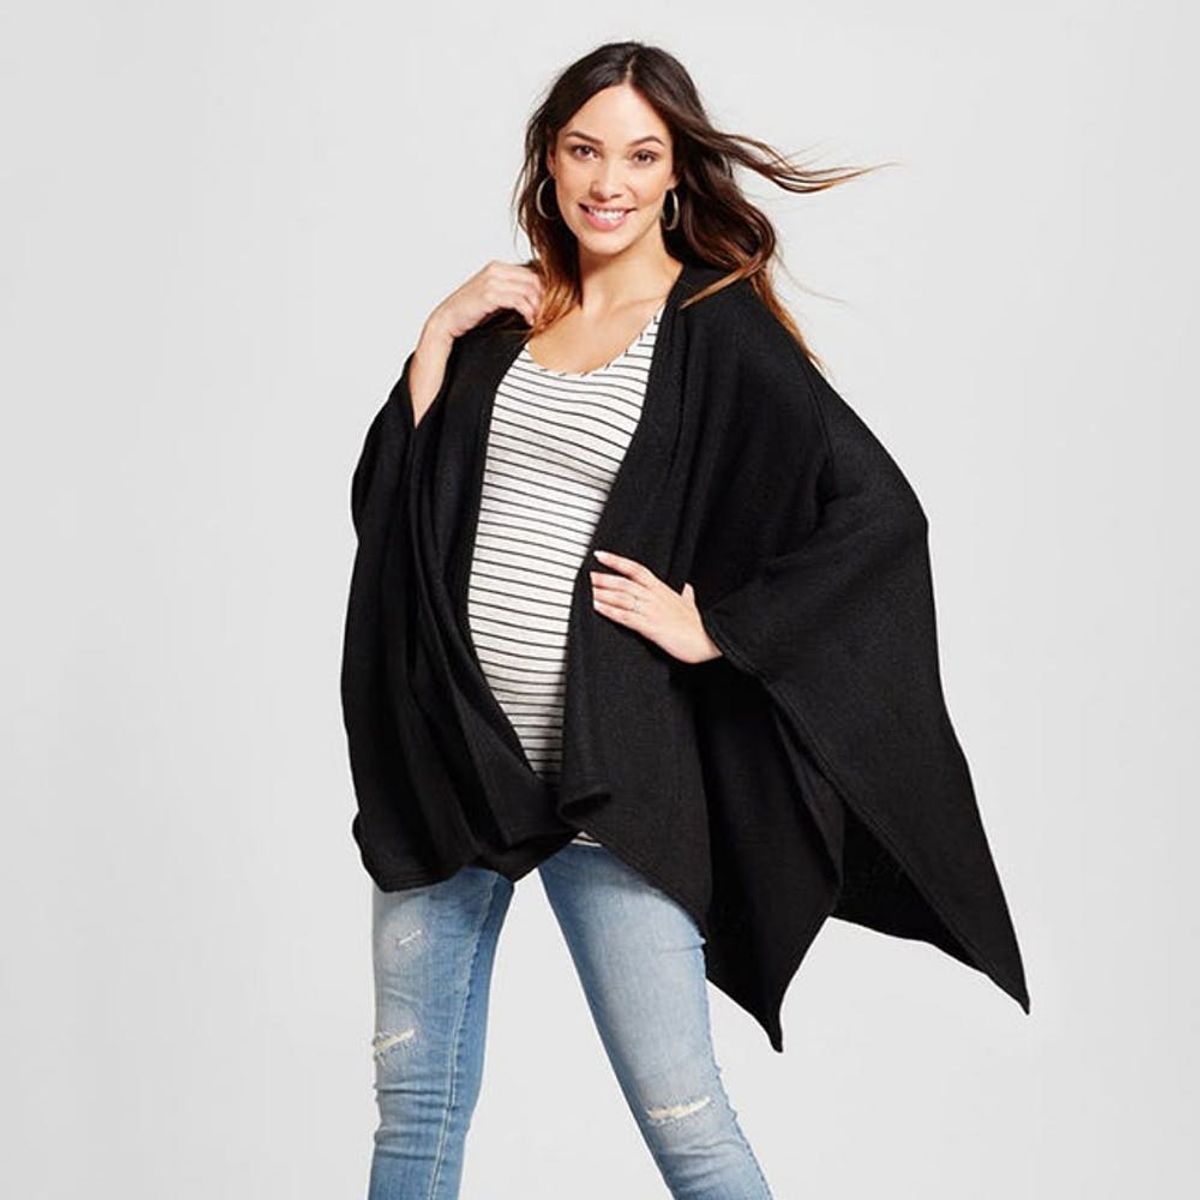 8 Cozy Maternity Styles for Sweater Weather